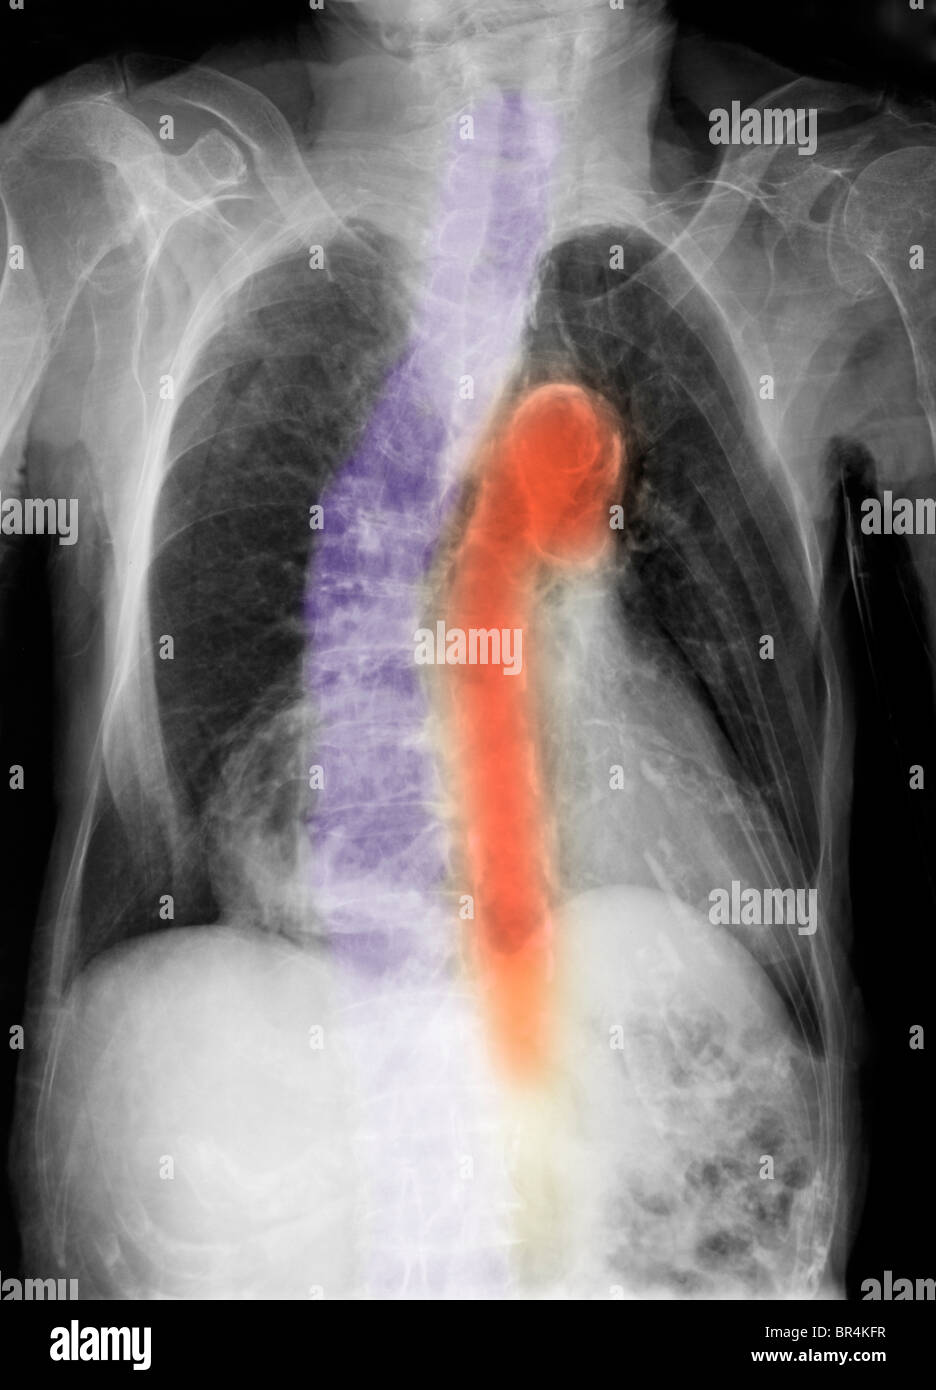 chest x-ray of a 96 year old woman with calcifications of the aorta, scoliosis and degenerative changes Stock Photo